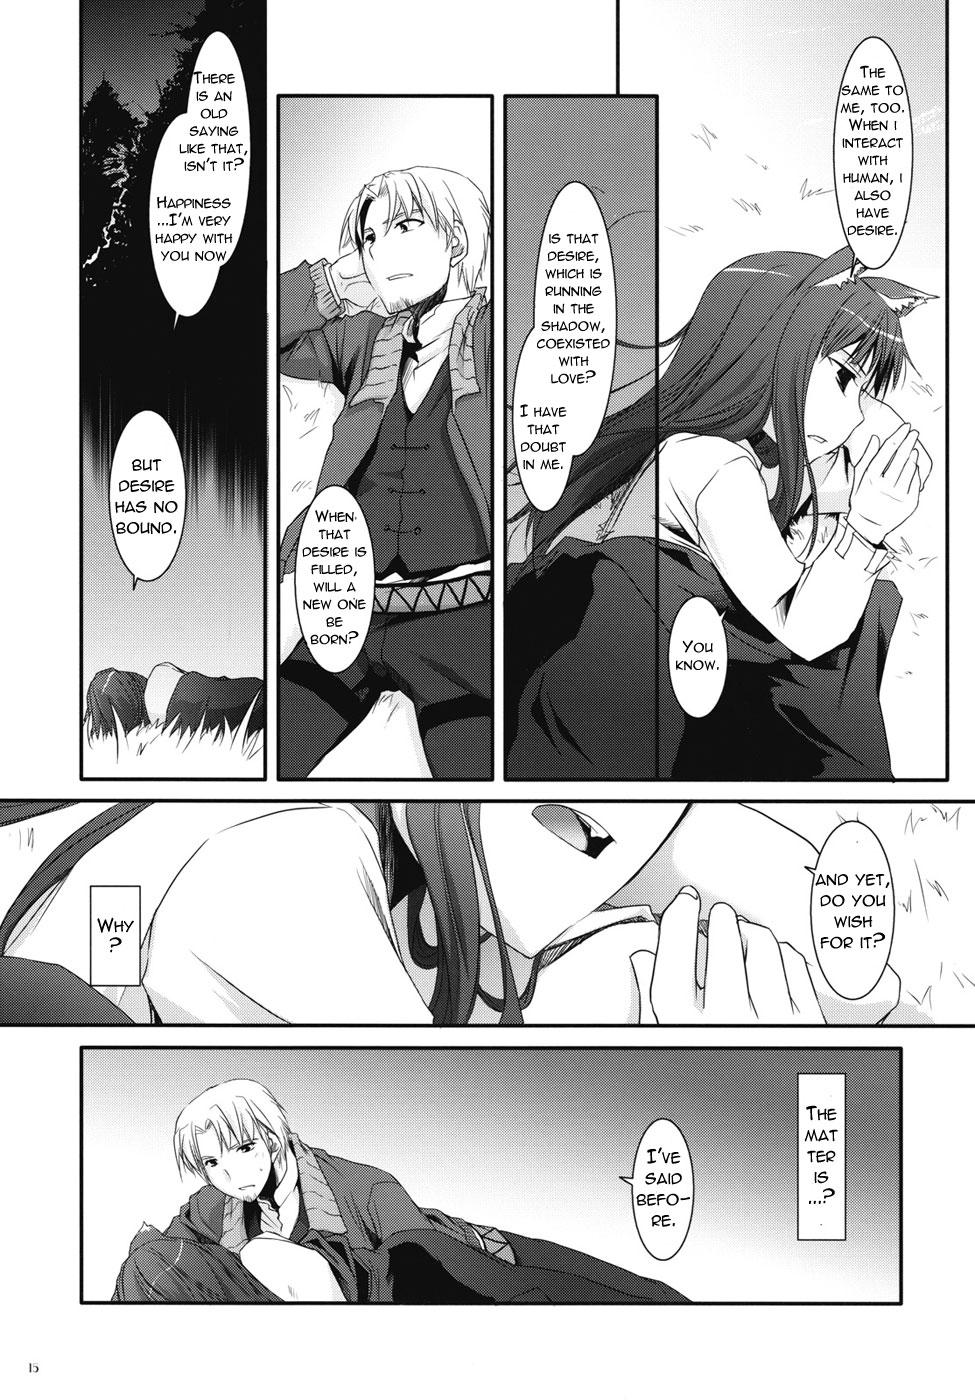 Gape D.L. action 43 - Spice and wolf Boobs - Page 13